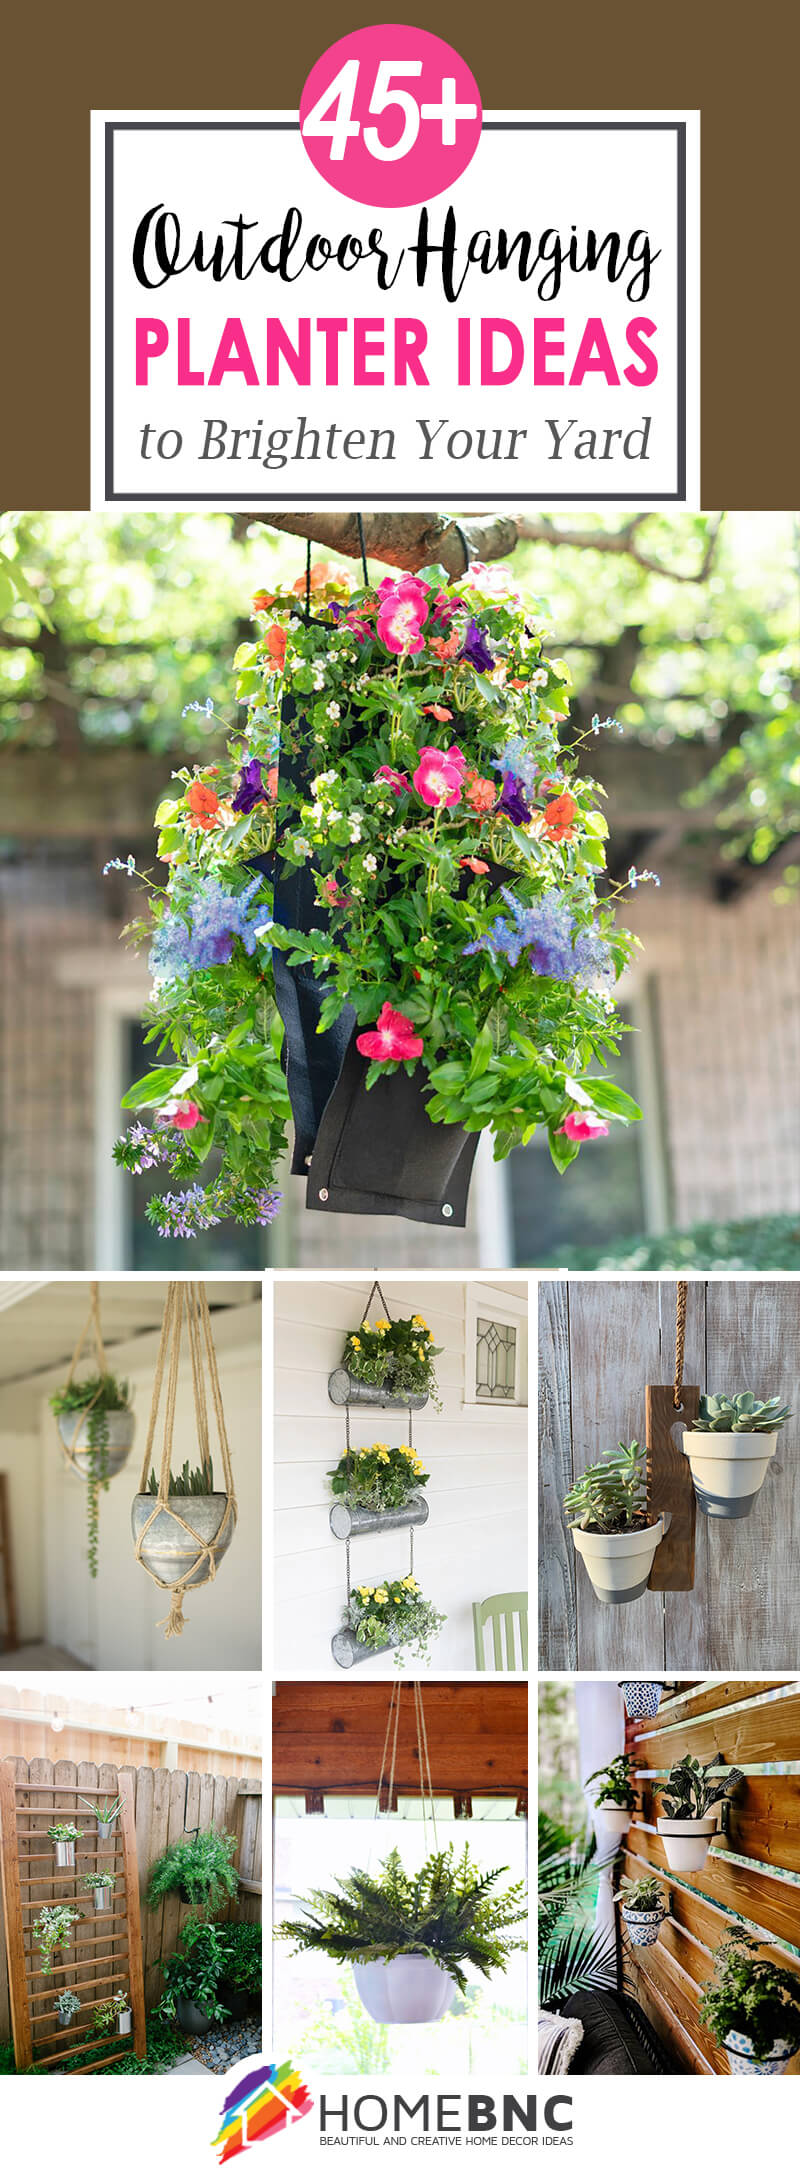 20+ Best Outdoor Hanging Planter Ideas and Designs for 20